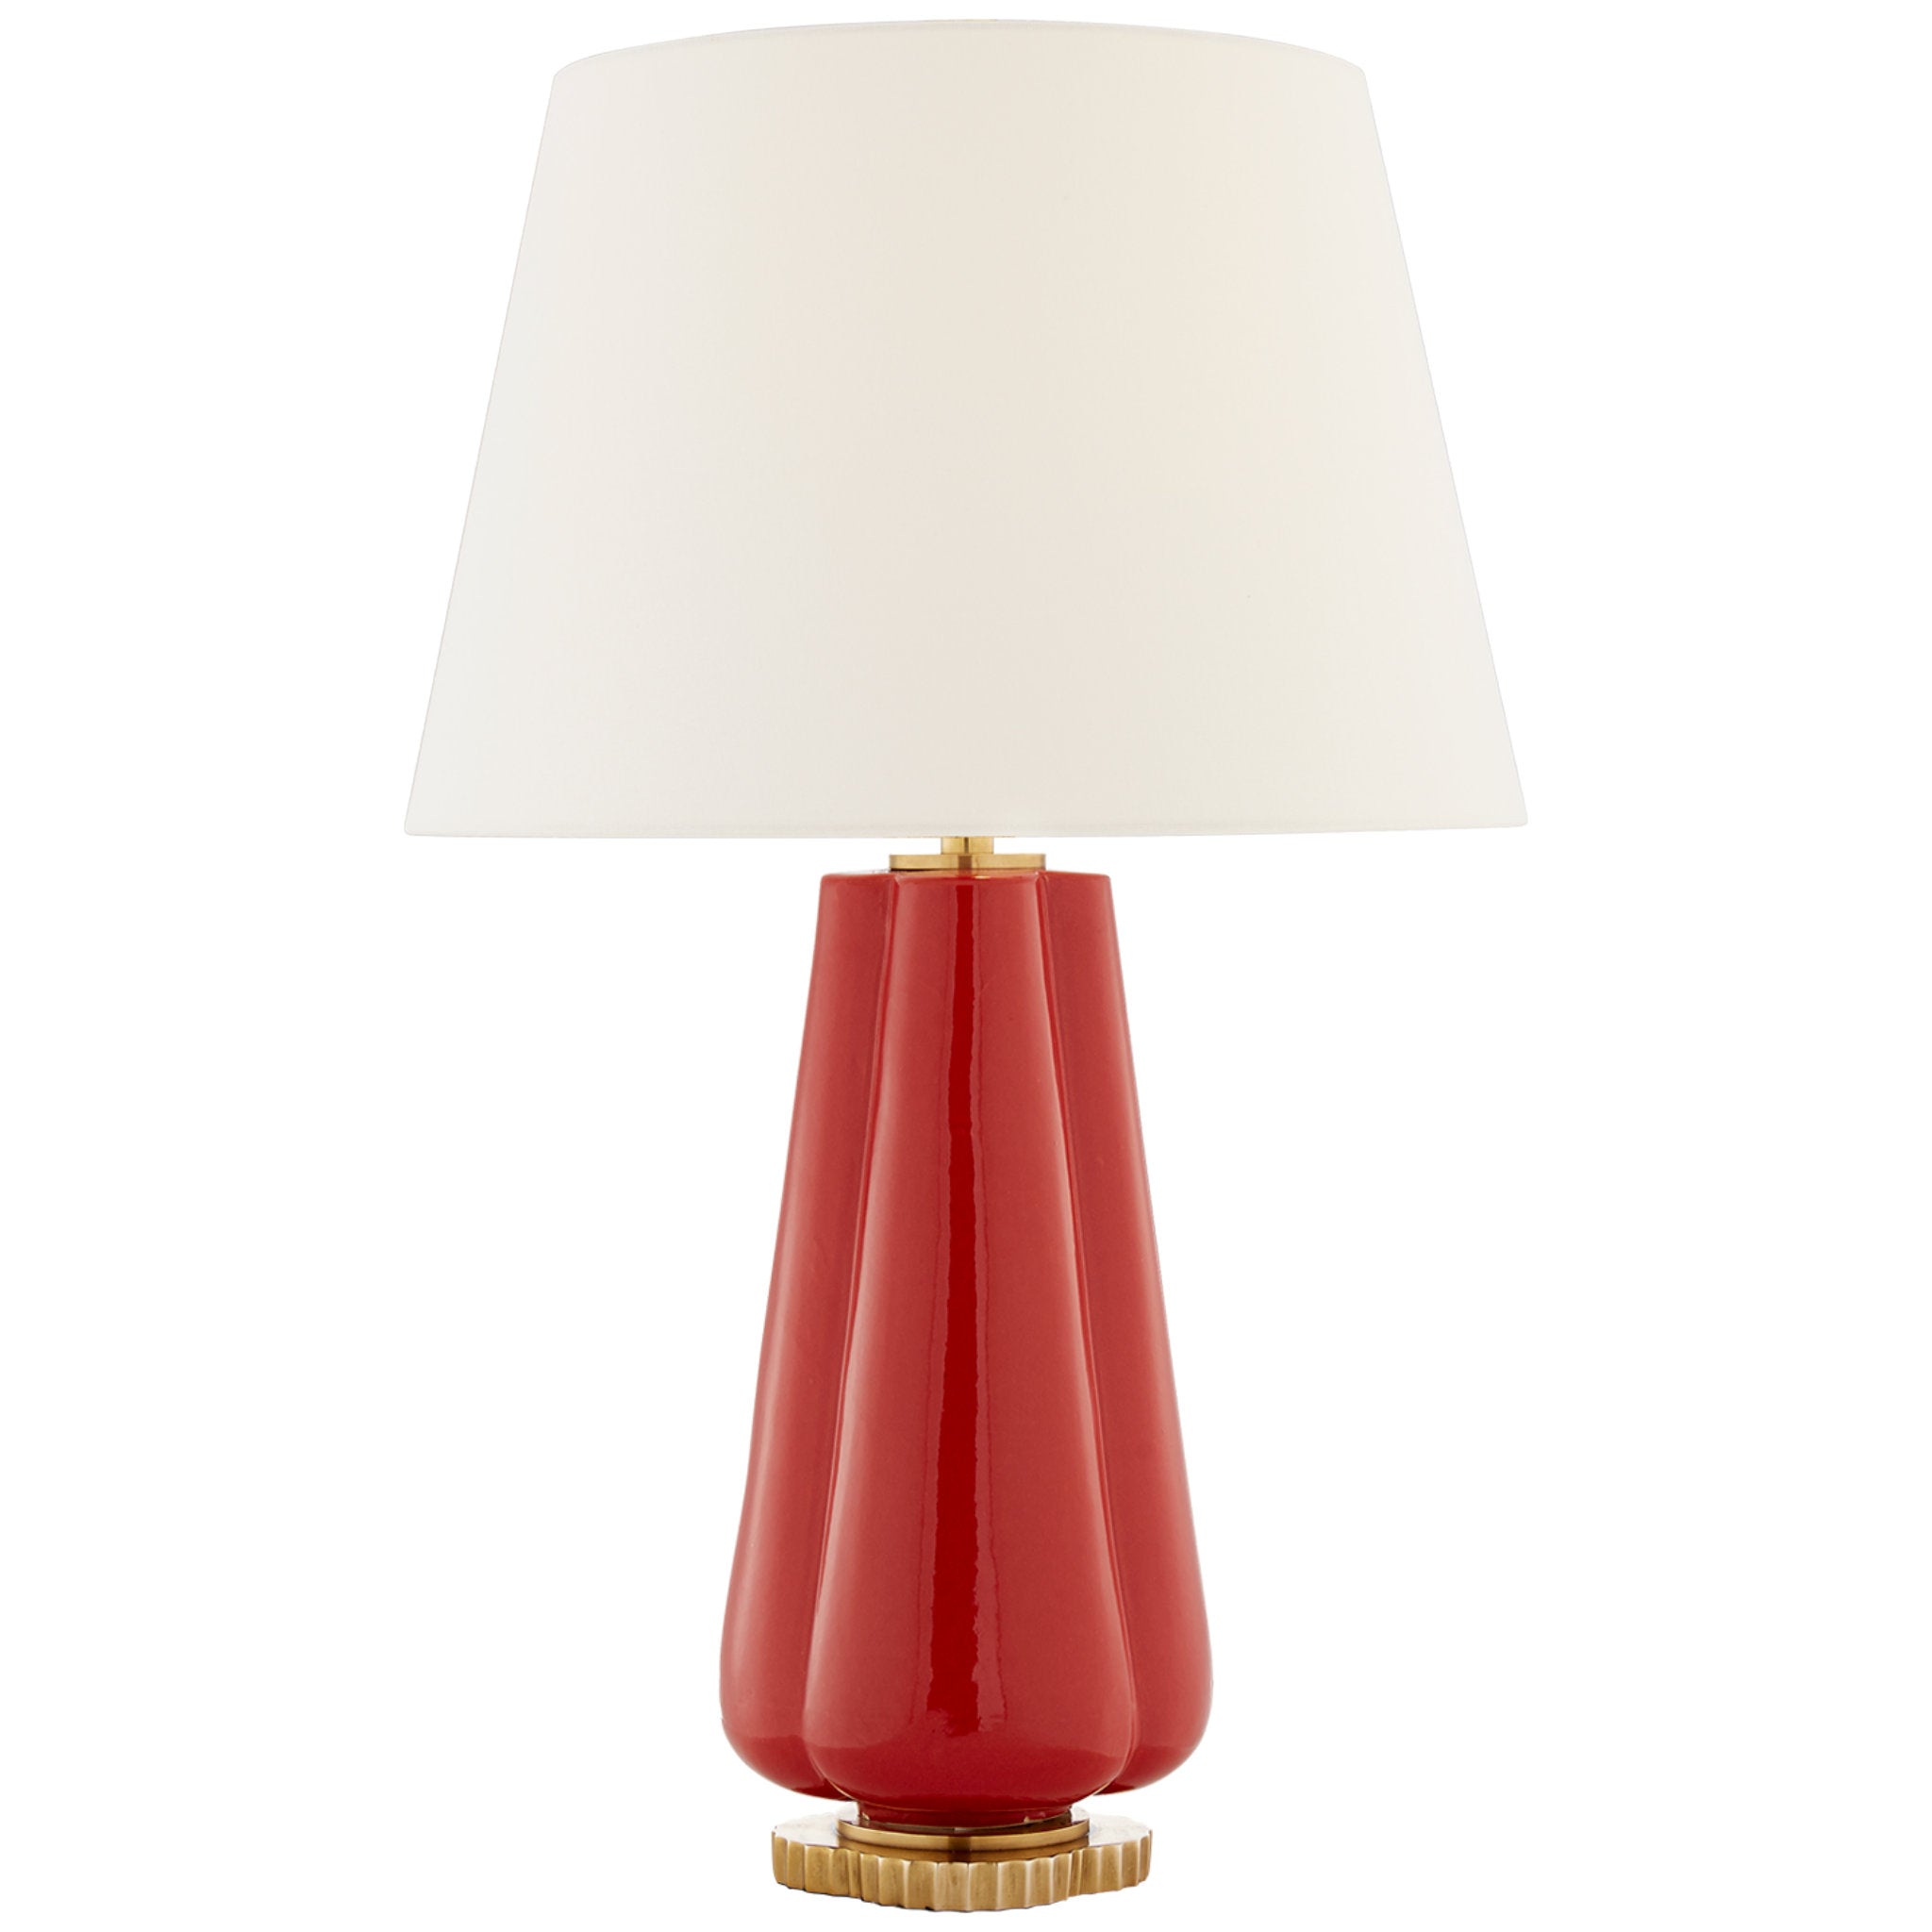 Alexa Hampton Penelope Table Lamp in Berry Red with Linen Shade